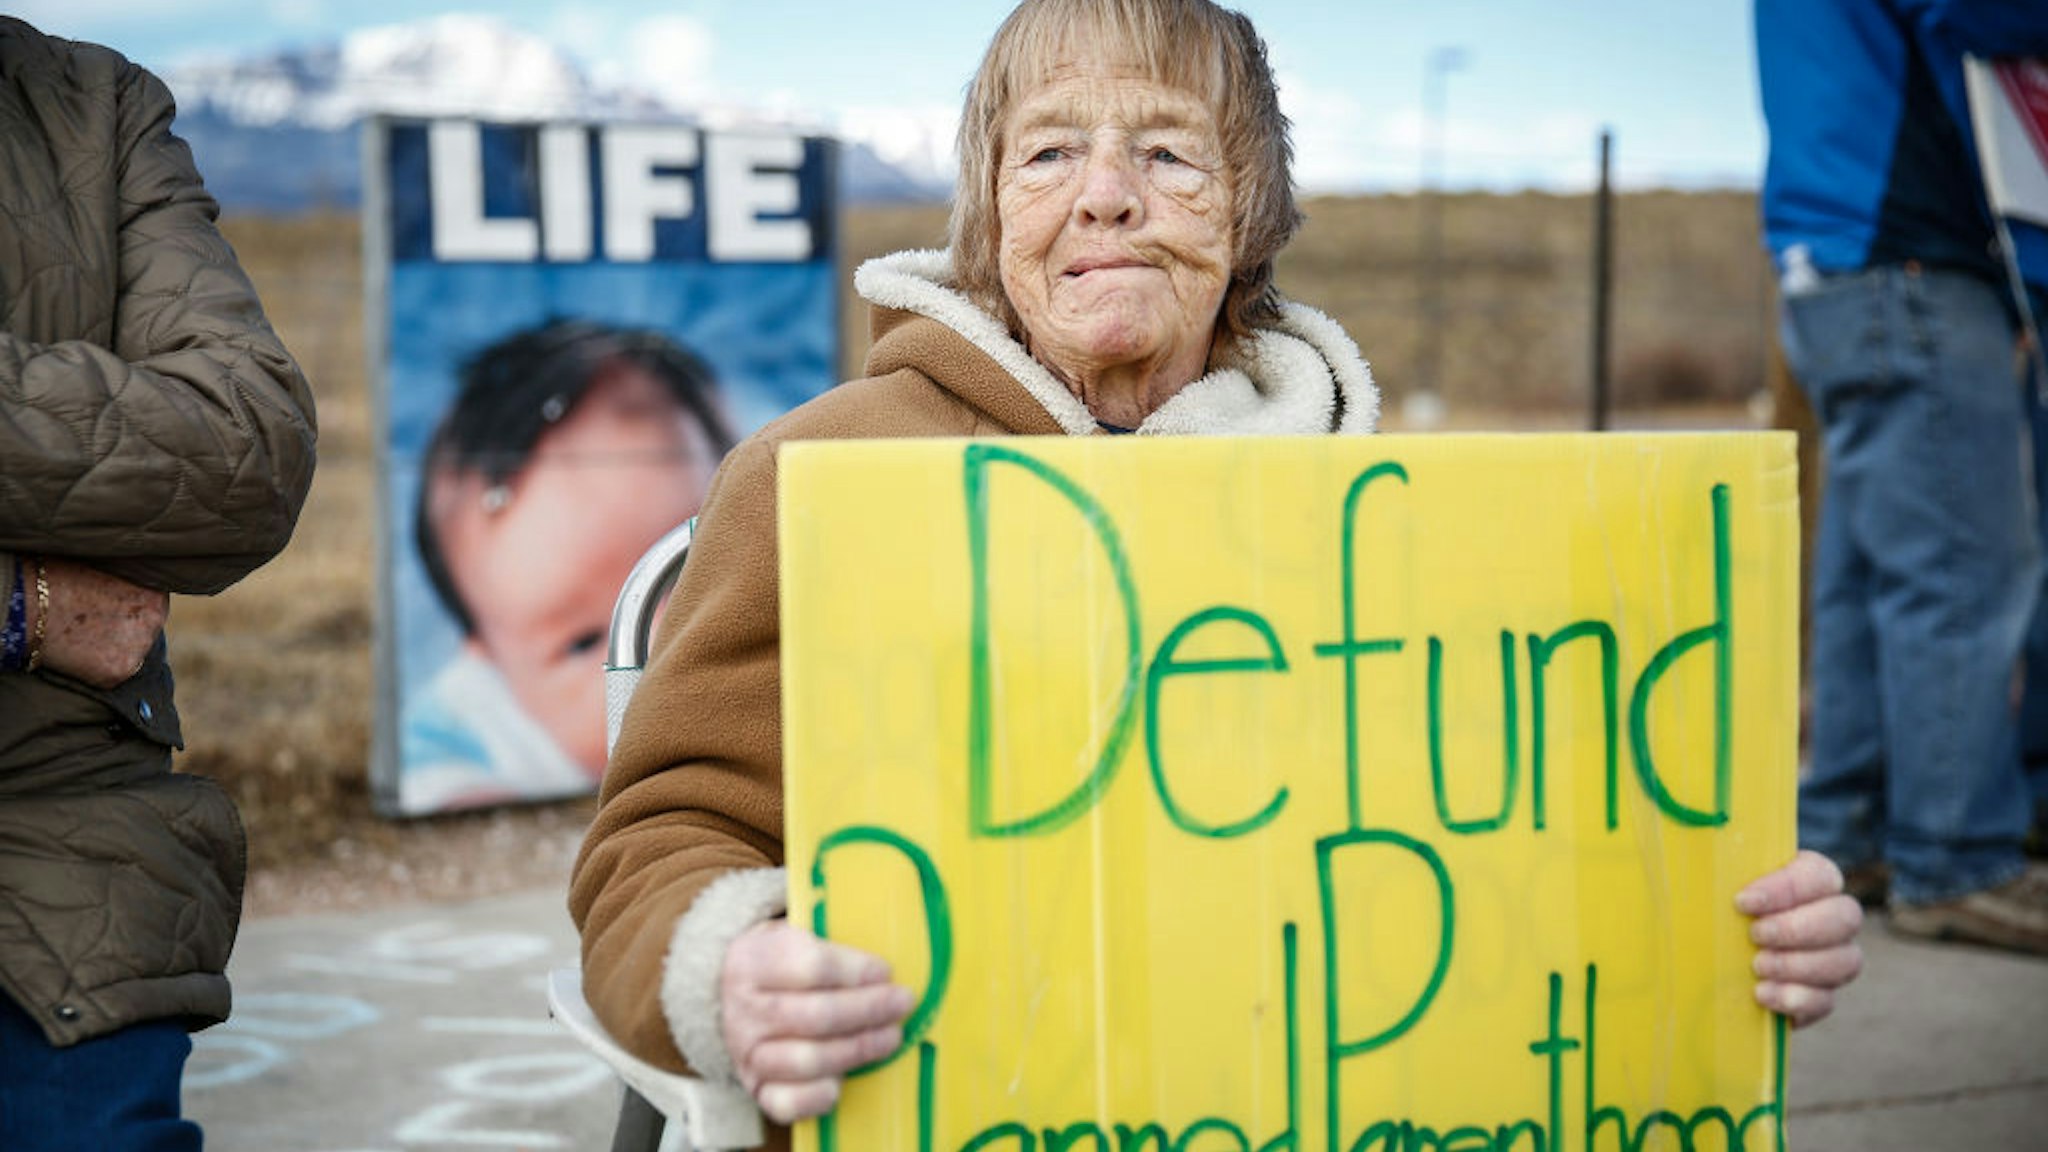 COLORADO SPRINGS, CO - FEBRUARY 11: Pro-Life protestor Rose Ann Schienle of Colorado Springs, Colorado holds a sign while demonstrating outside of the Colorado Springs Westside Health Center February 11, 2017 in Colorado Springs, Colorado. The protest is part of nationwide demonstrations that were held at Planned Parenthood locations in more than 200 cities in an attempt to raise support for restricting women's ability to have abortions in the United States. (Photo by Marc Piscotty/Getty Images)